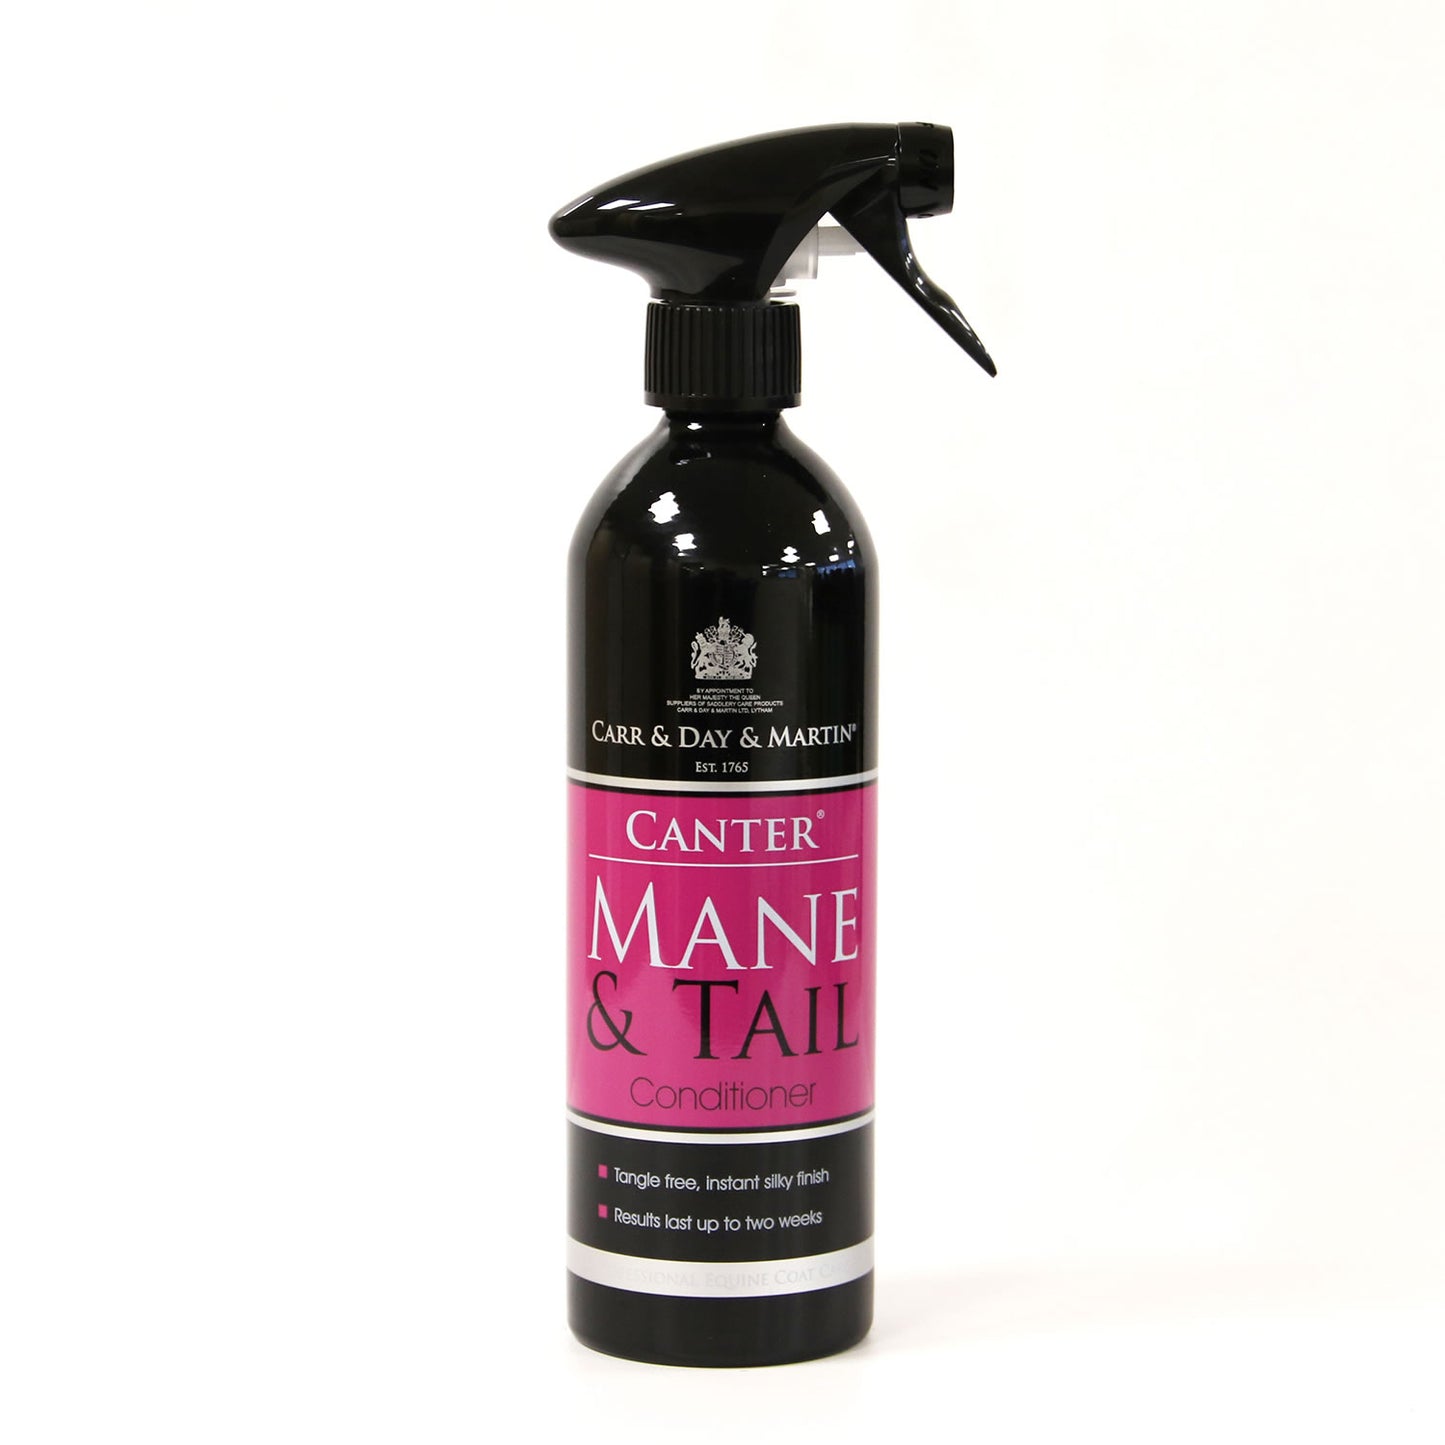 CANTER MANE & TAIL CONDITIONER SPRAY